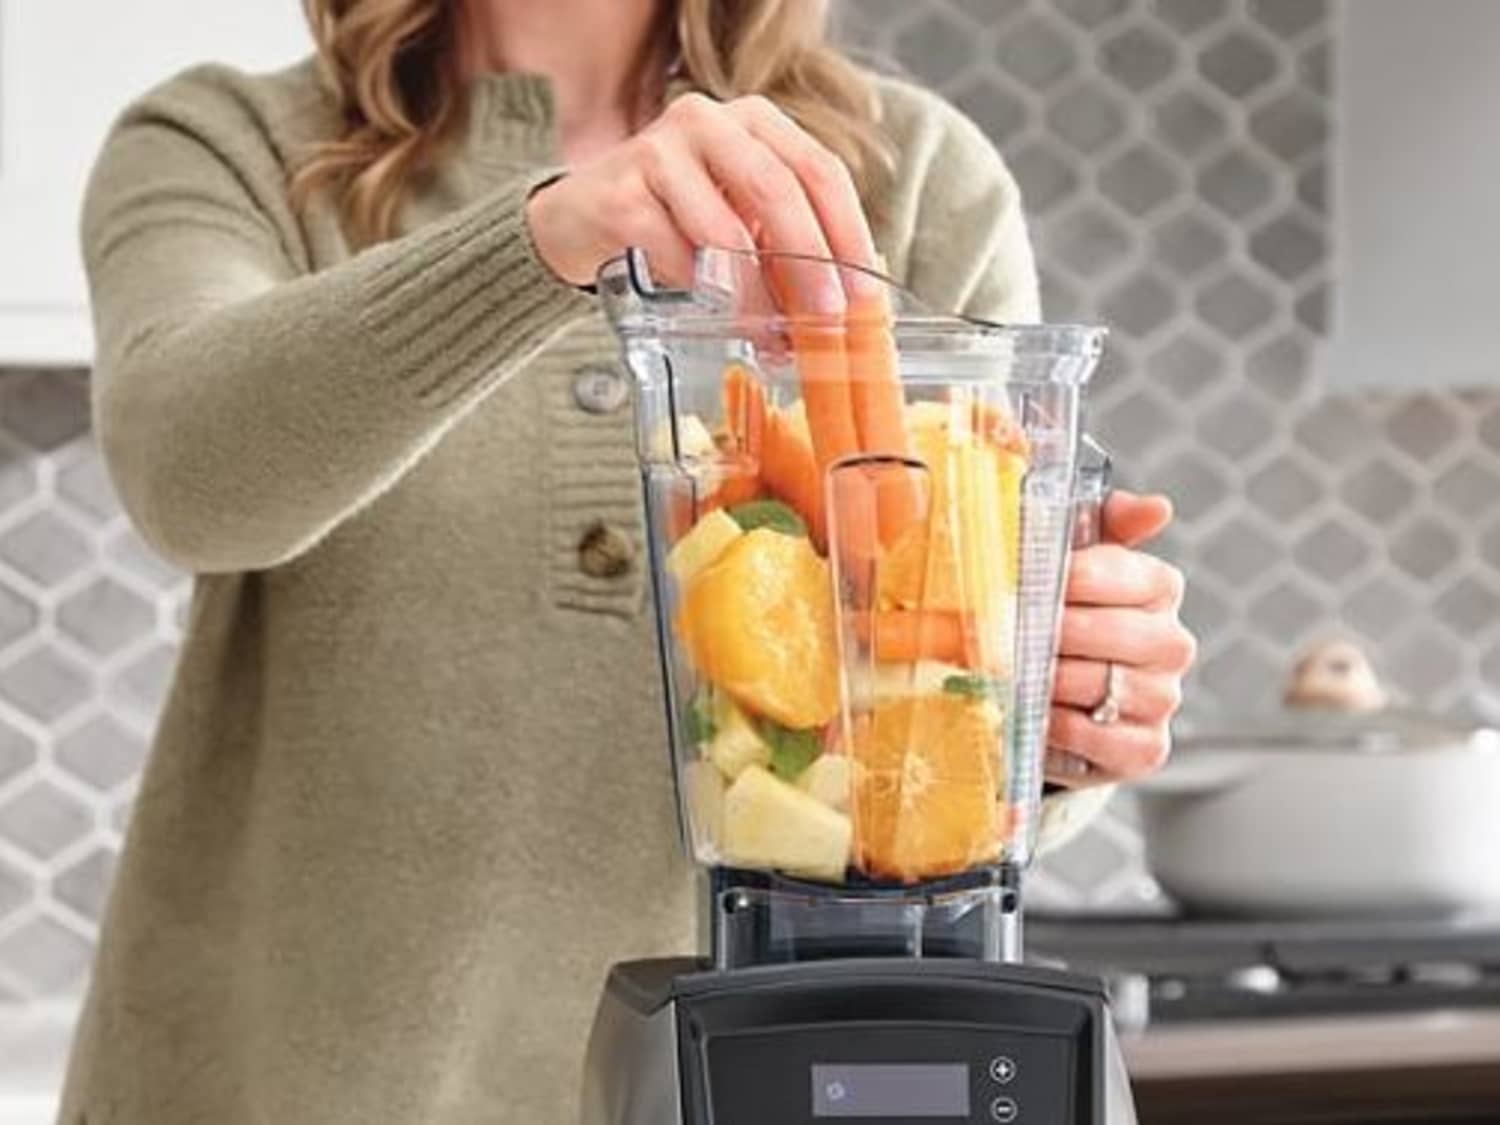 Vitamix One Review: Does Vitamix's Least Expensive Blender Hold Up